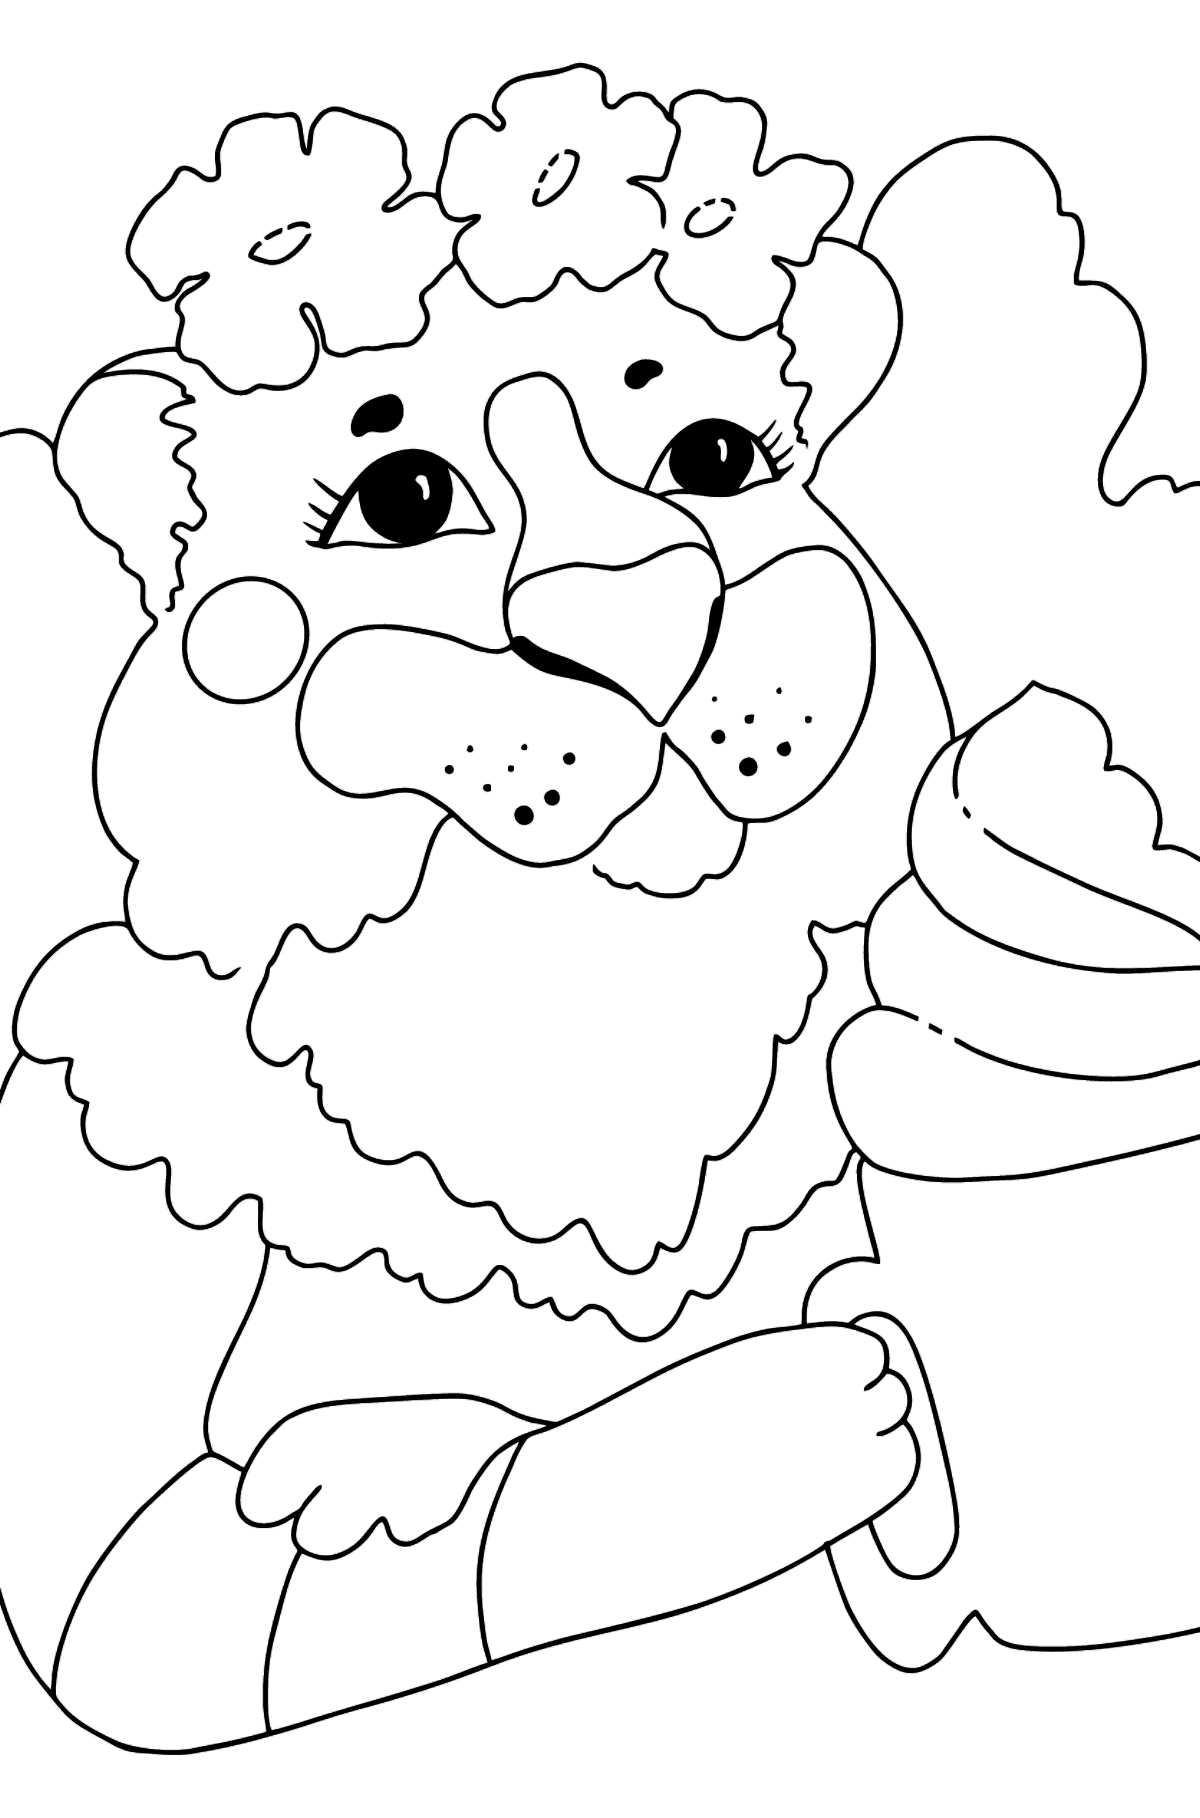 Coloring Page - A Tigress and Tasty Hot Chocolate - Coloring Pages for Kids